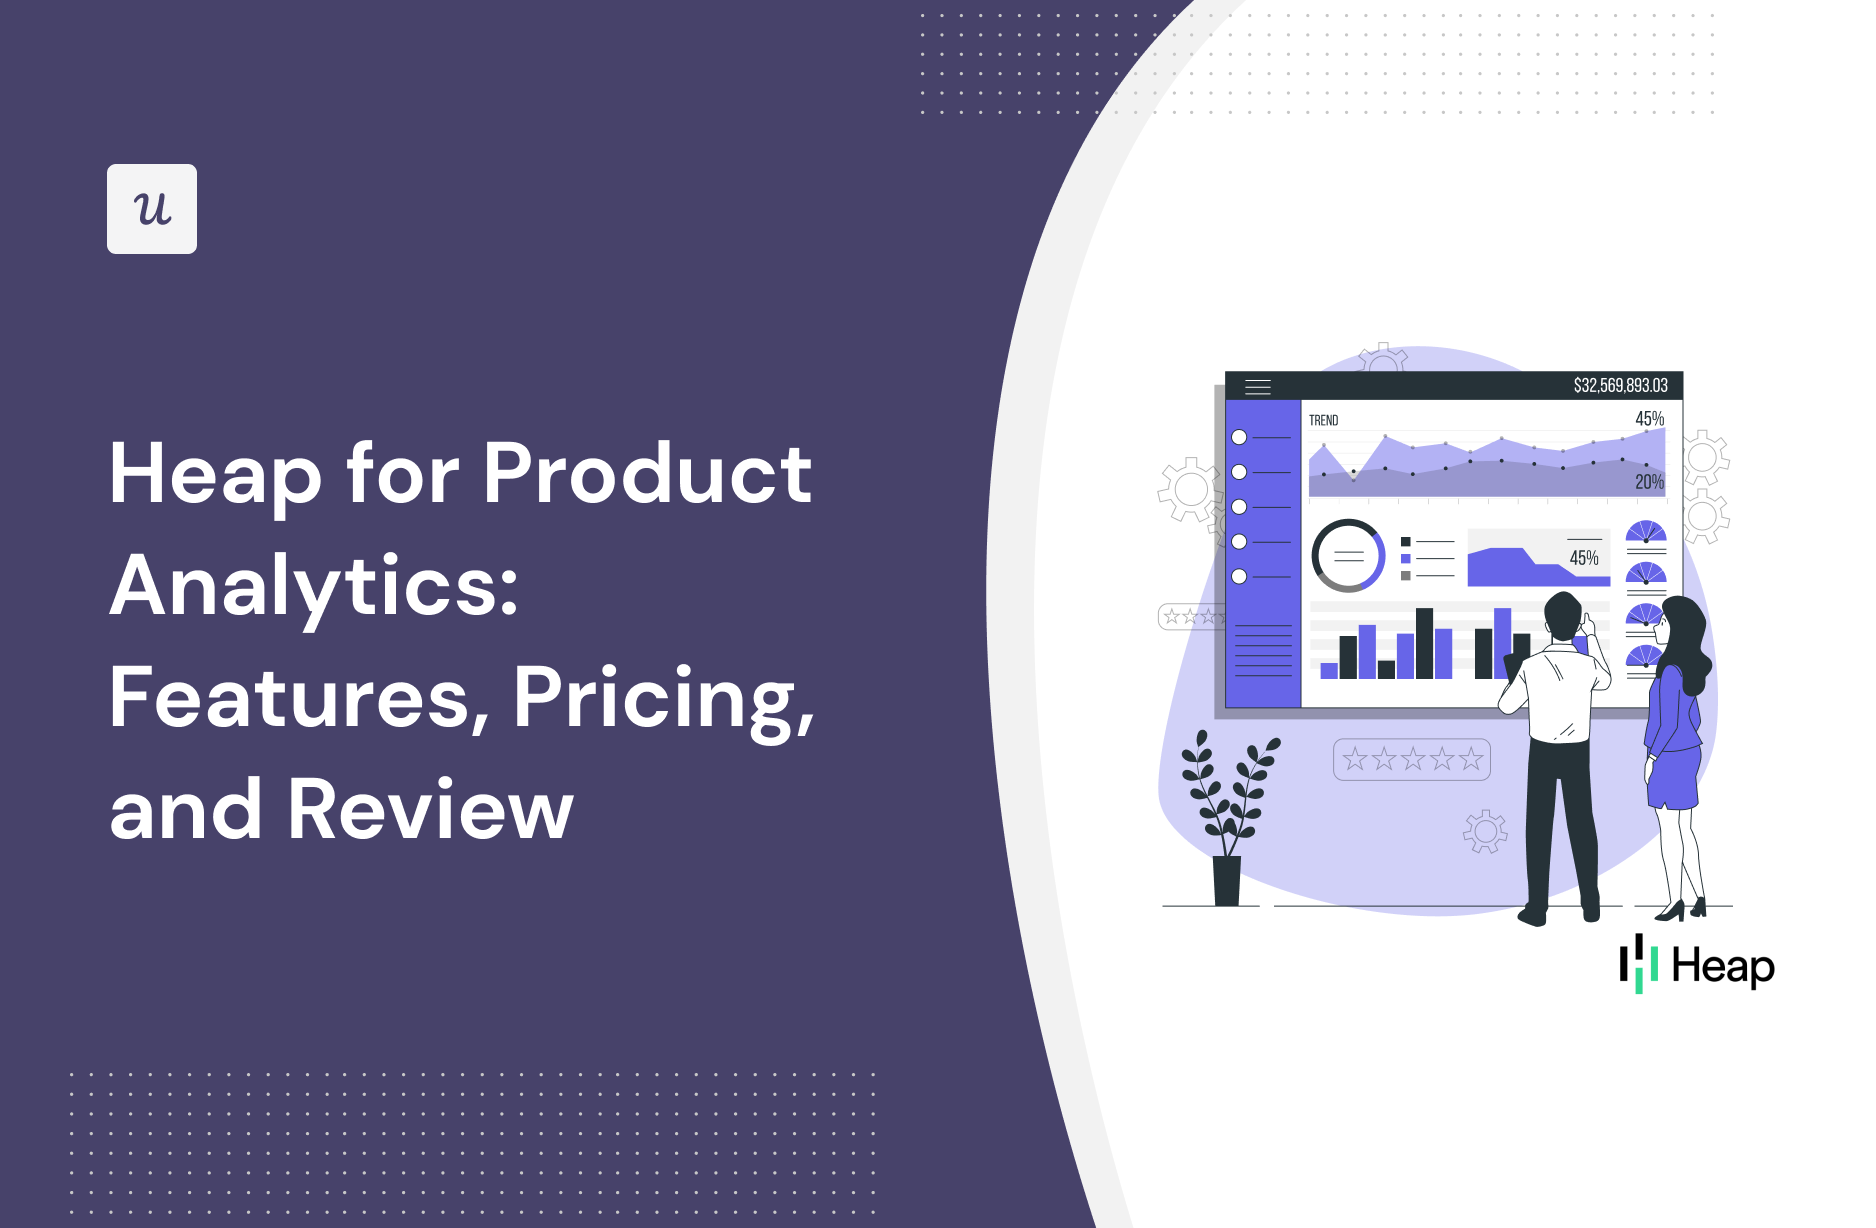 Heap for Product Analytics: Features, Pricing, and Review